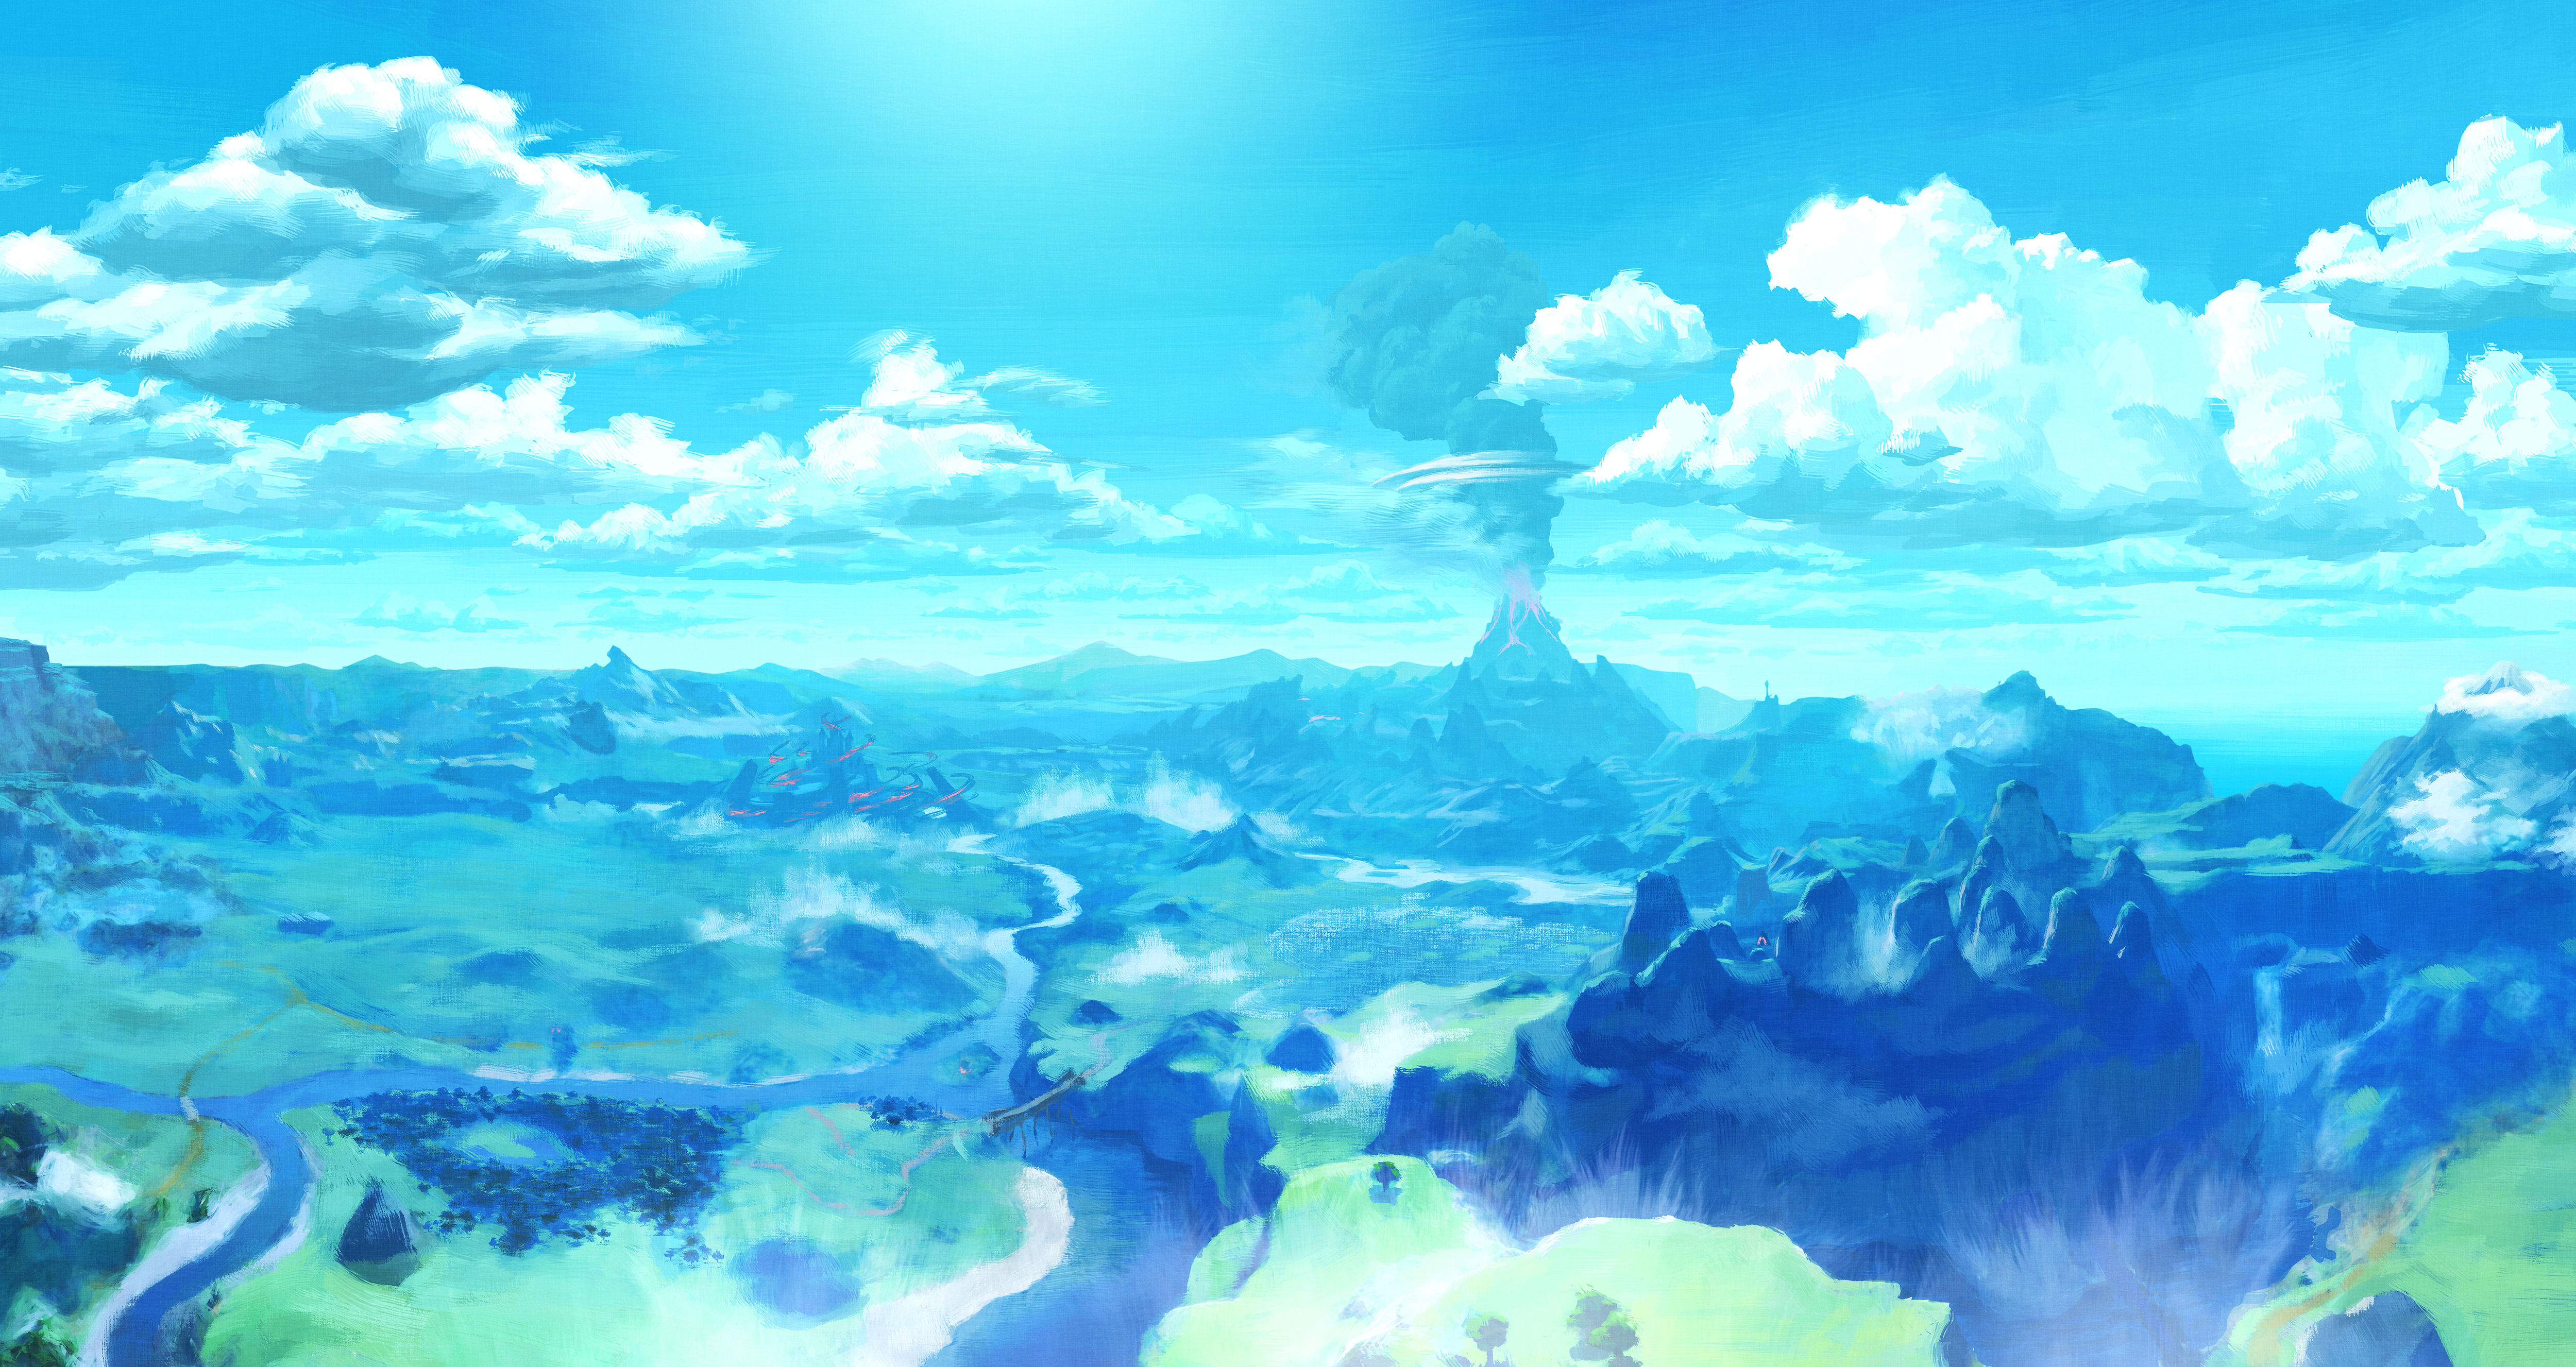 The Legend Of Zelda Breath Of The Wild 4k Ultra Hd Wallpaper Background Image 5000x2654 Id 789450 Wallpaper Abyss